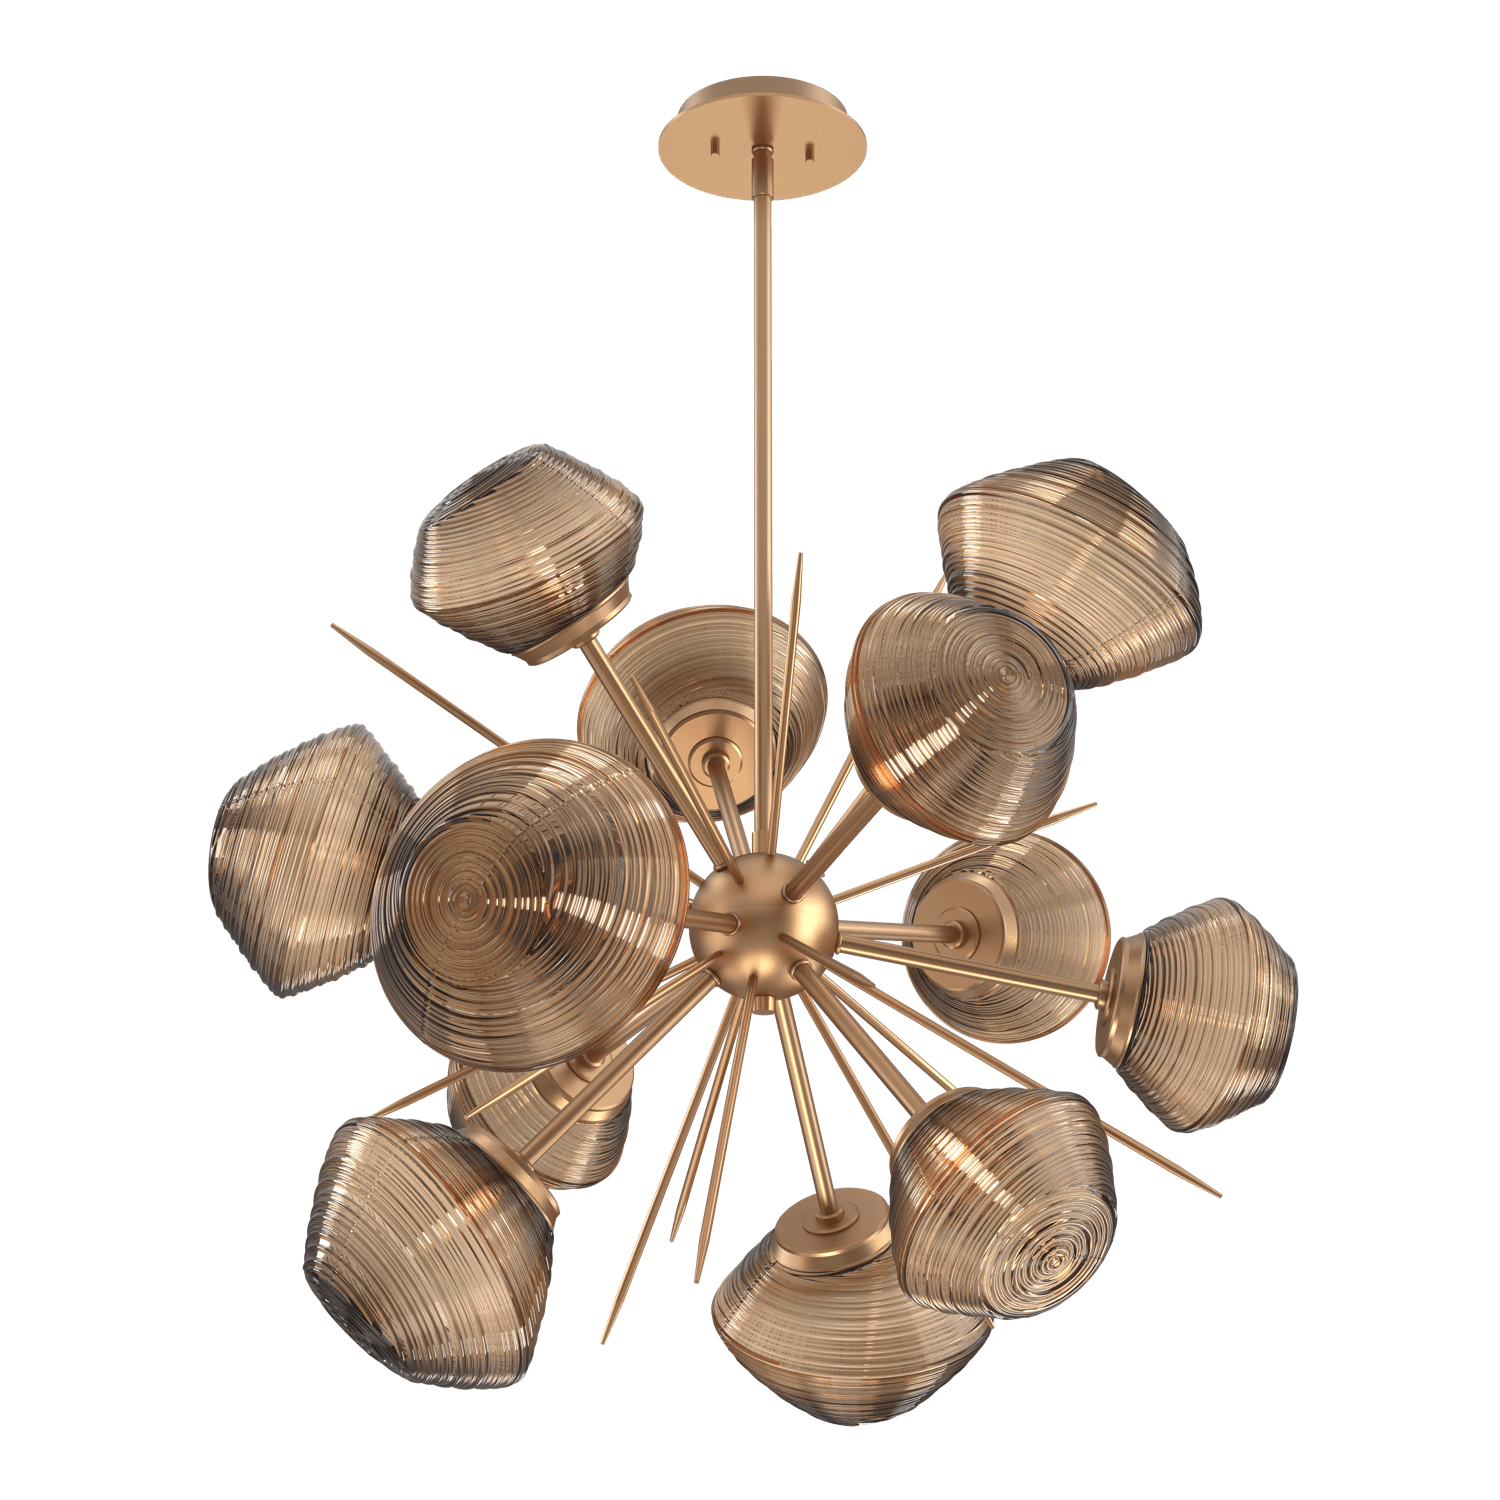 CHB0089-0G-NB-B-Hammerton-Studio-Mesa-36-inch-starburst-chandelier-with-novel-brass-finish-and-bronze-blown-glass-shades-and-LED-lamping